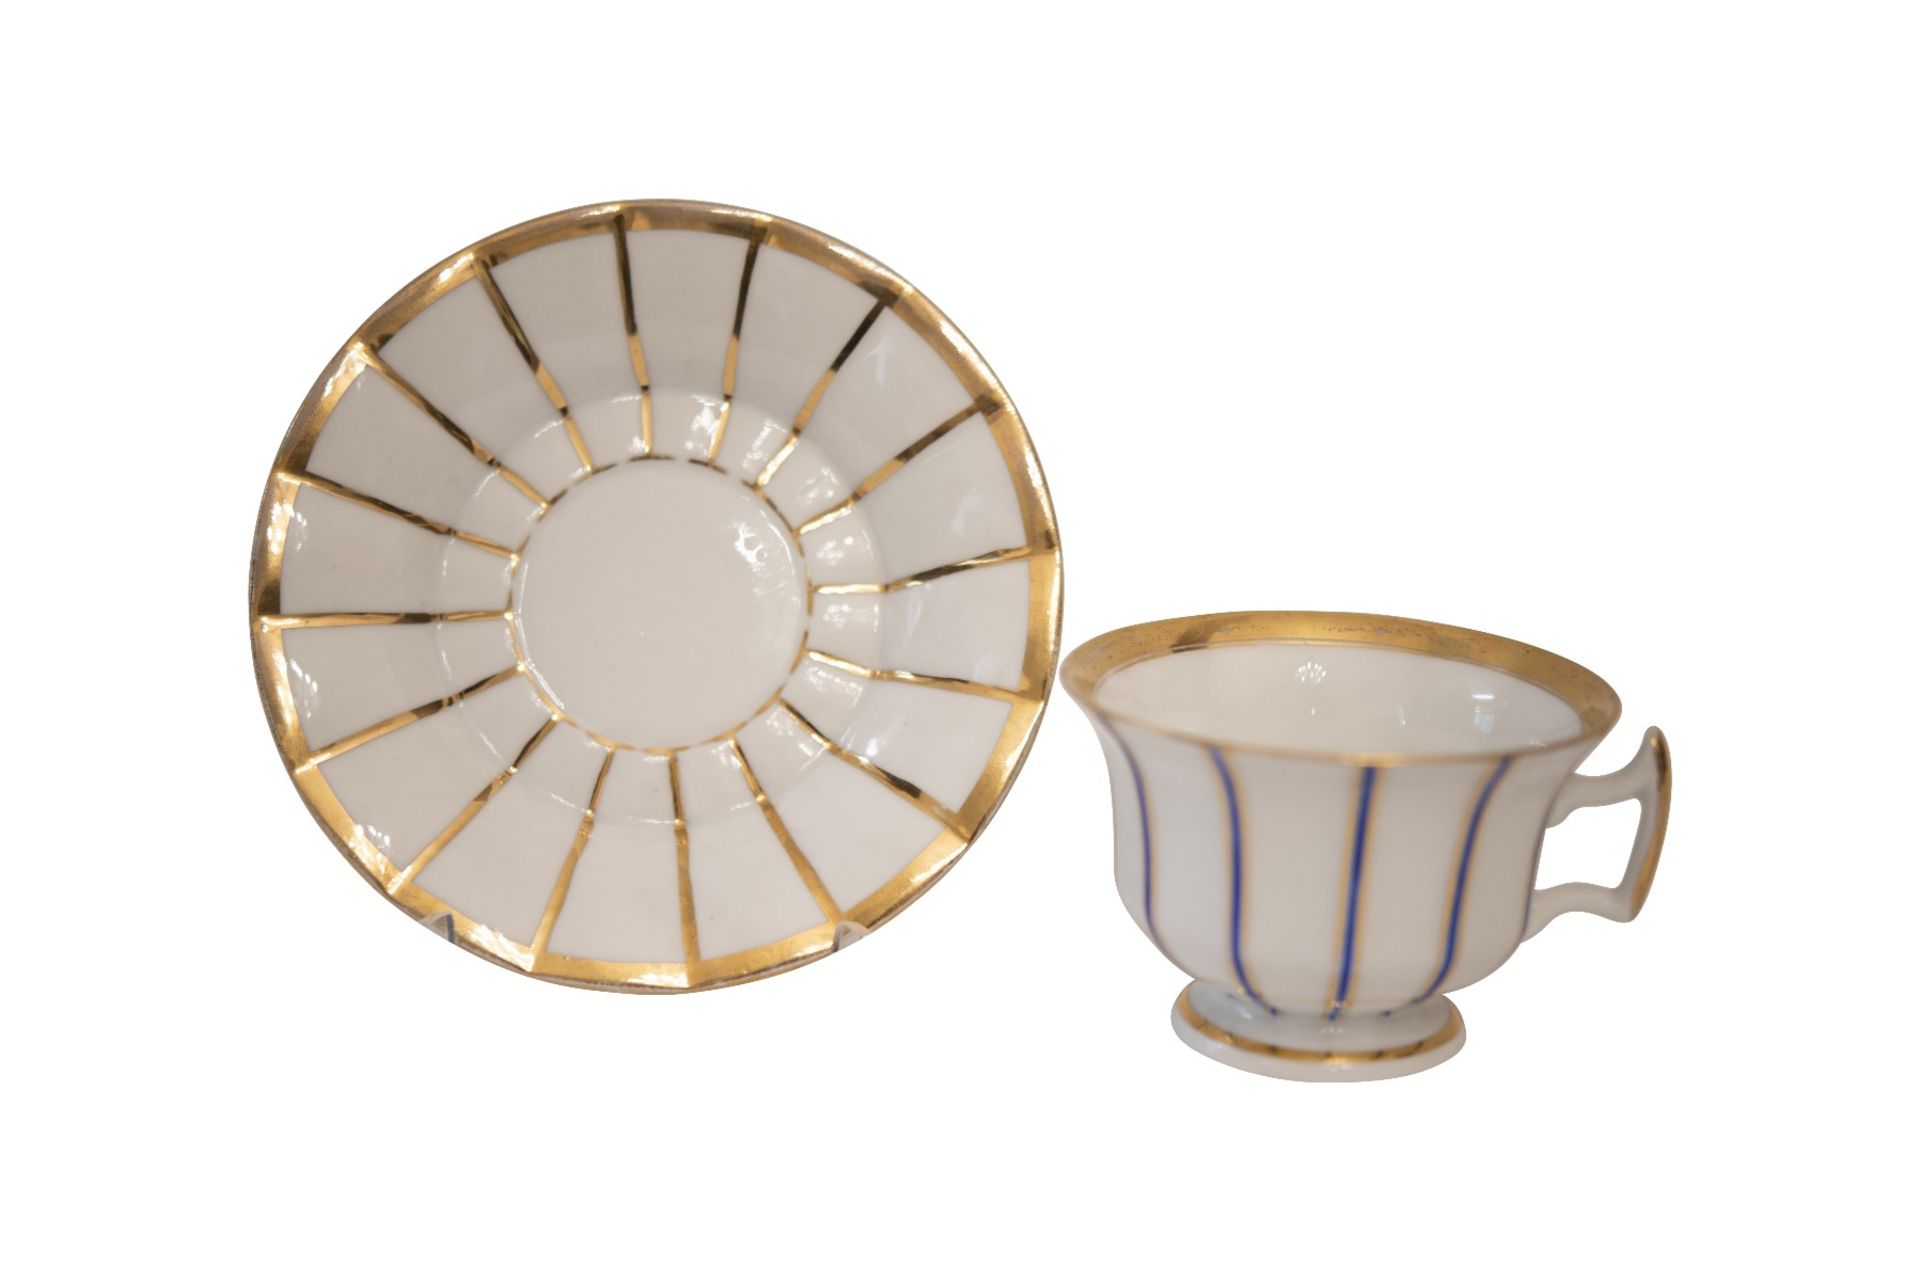 Porcelain collection cups - Image 3 of 7